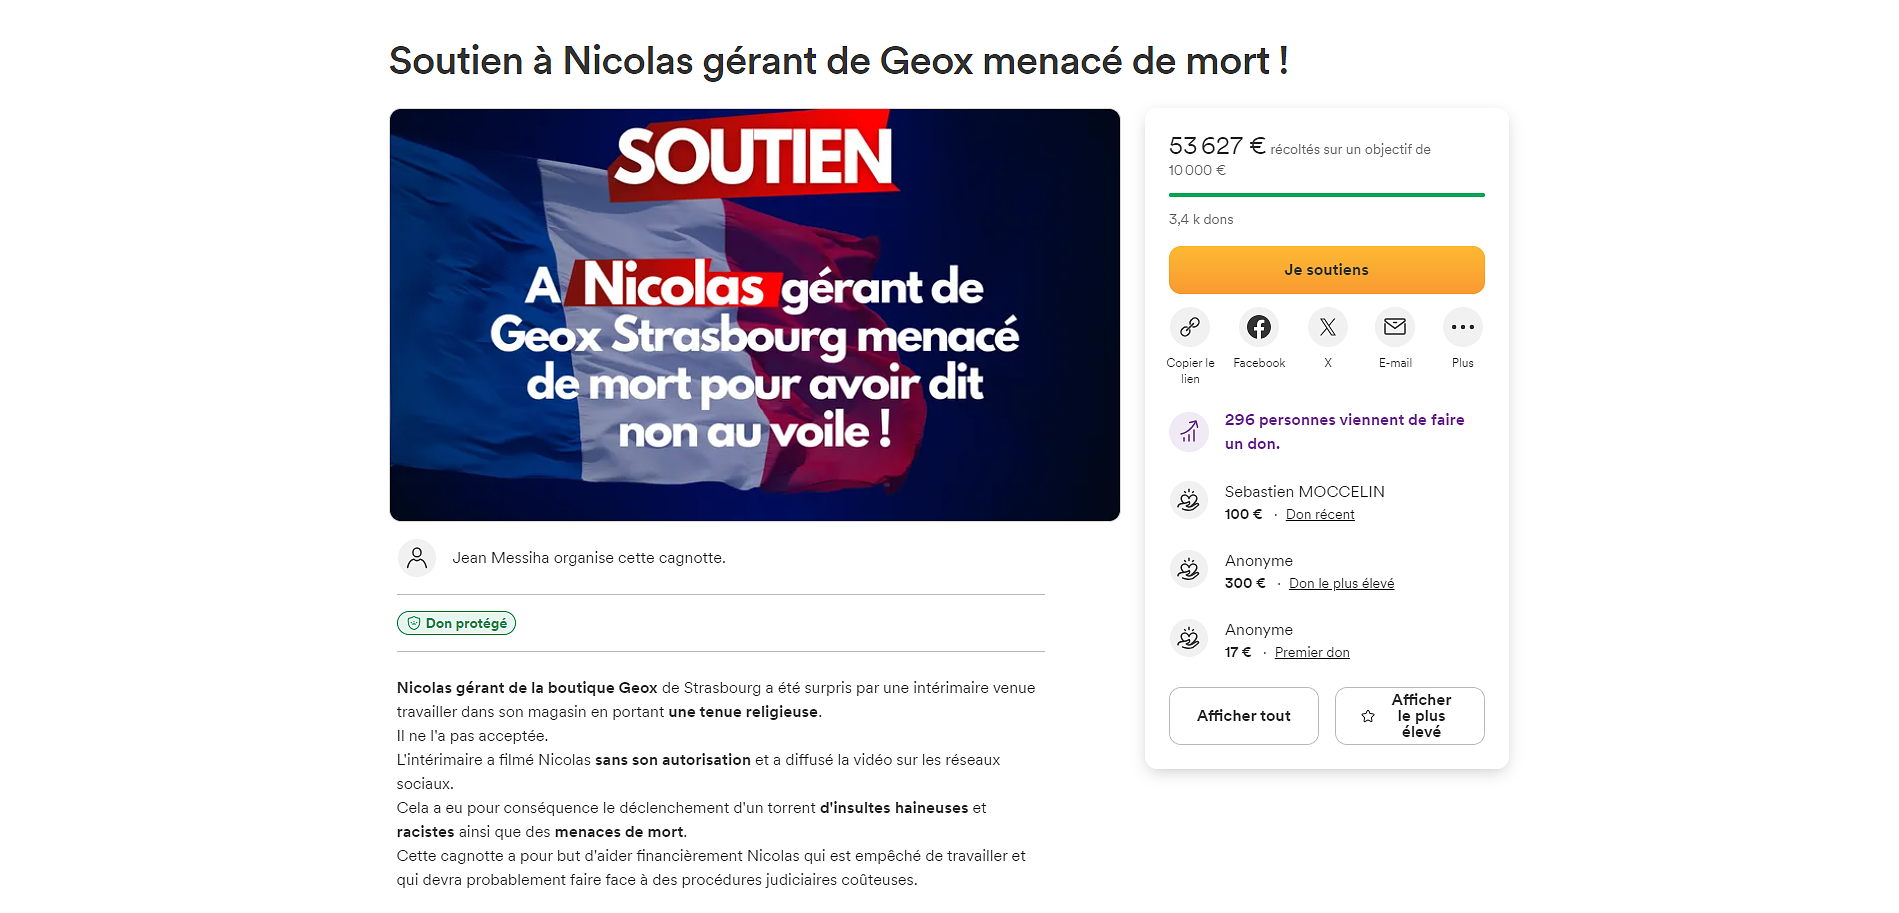 A pot of support for the manager of a Geox threatened with death exceeds 50,000 euros in donations